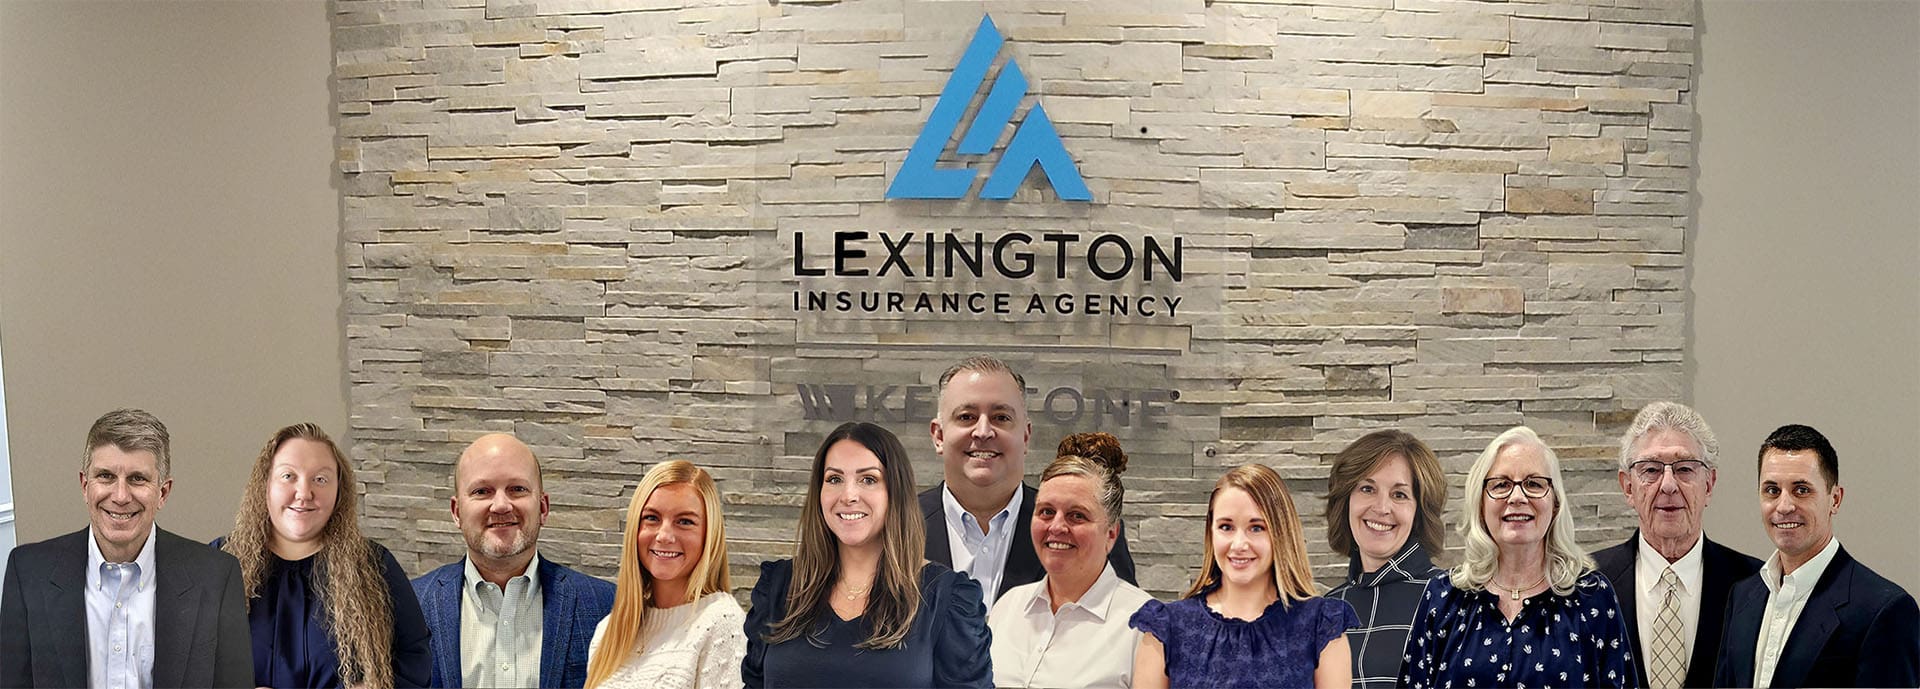 About Our Agency - Lexington Insurance Team in Front of a Rock Wall in the Office with the Lexington Logo Updated